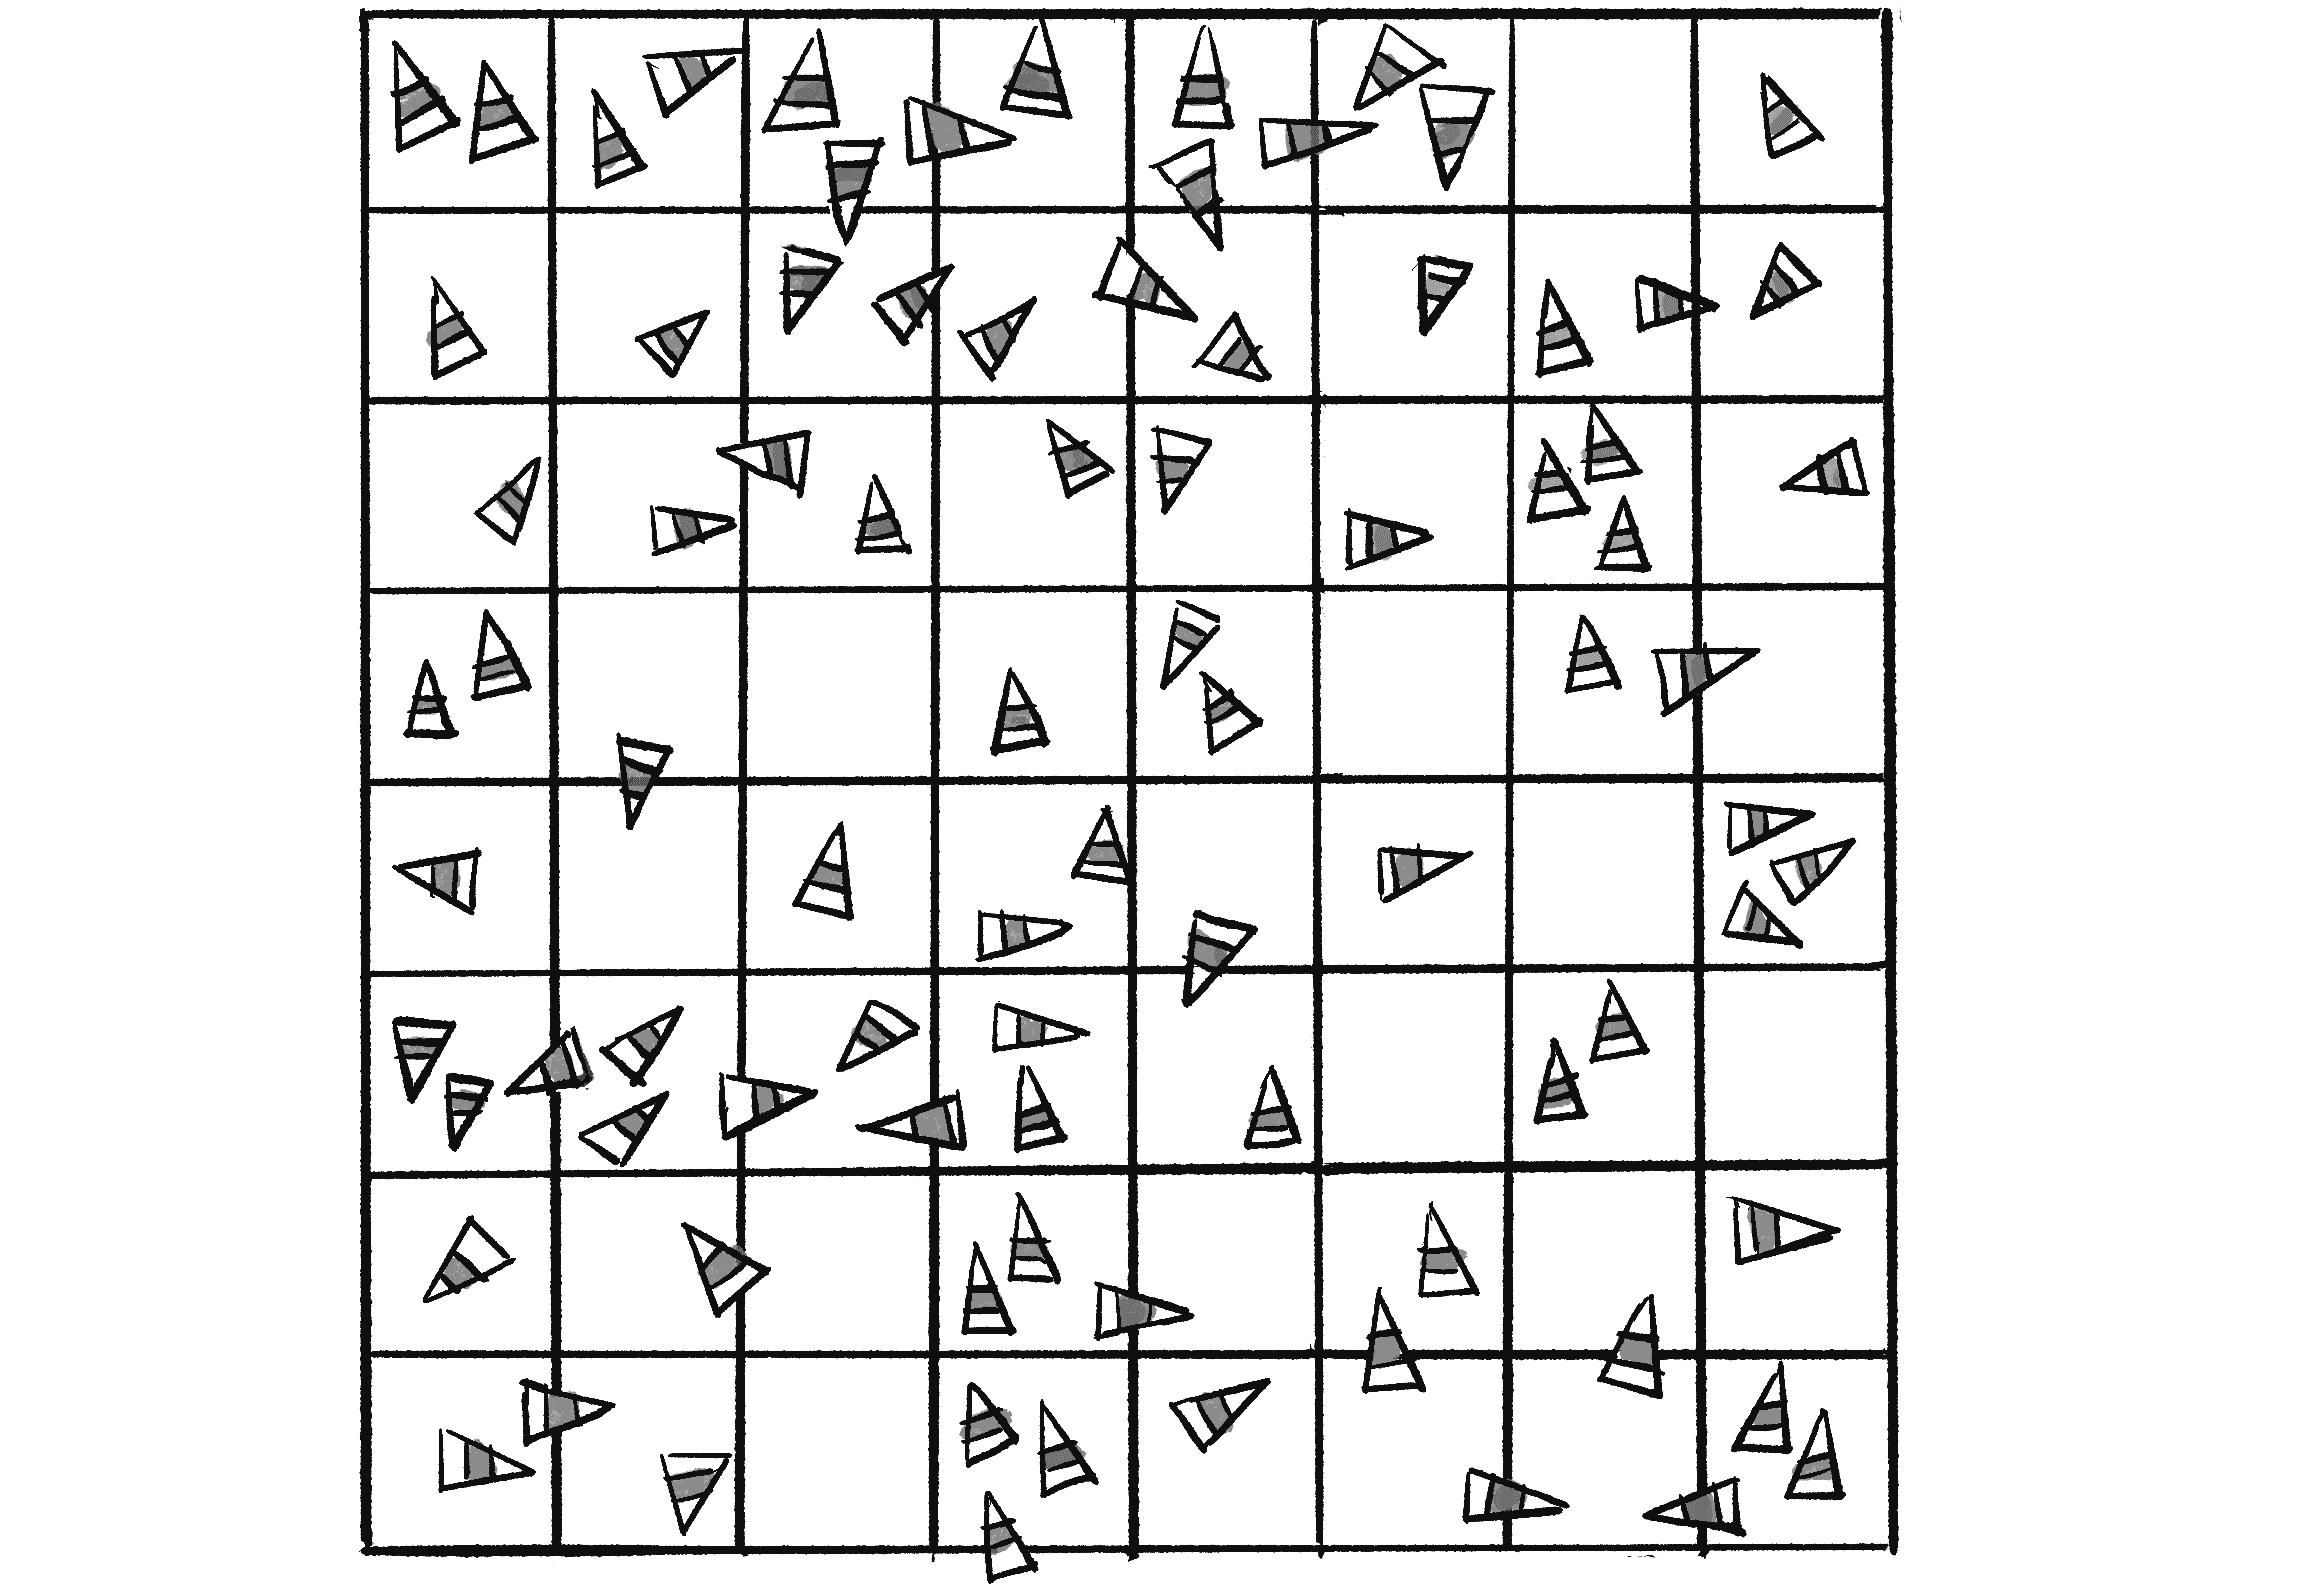 Figure 5.36: A square canvas full of vehicles, subdivided into a grid of square cells